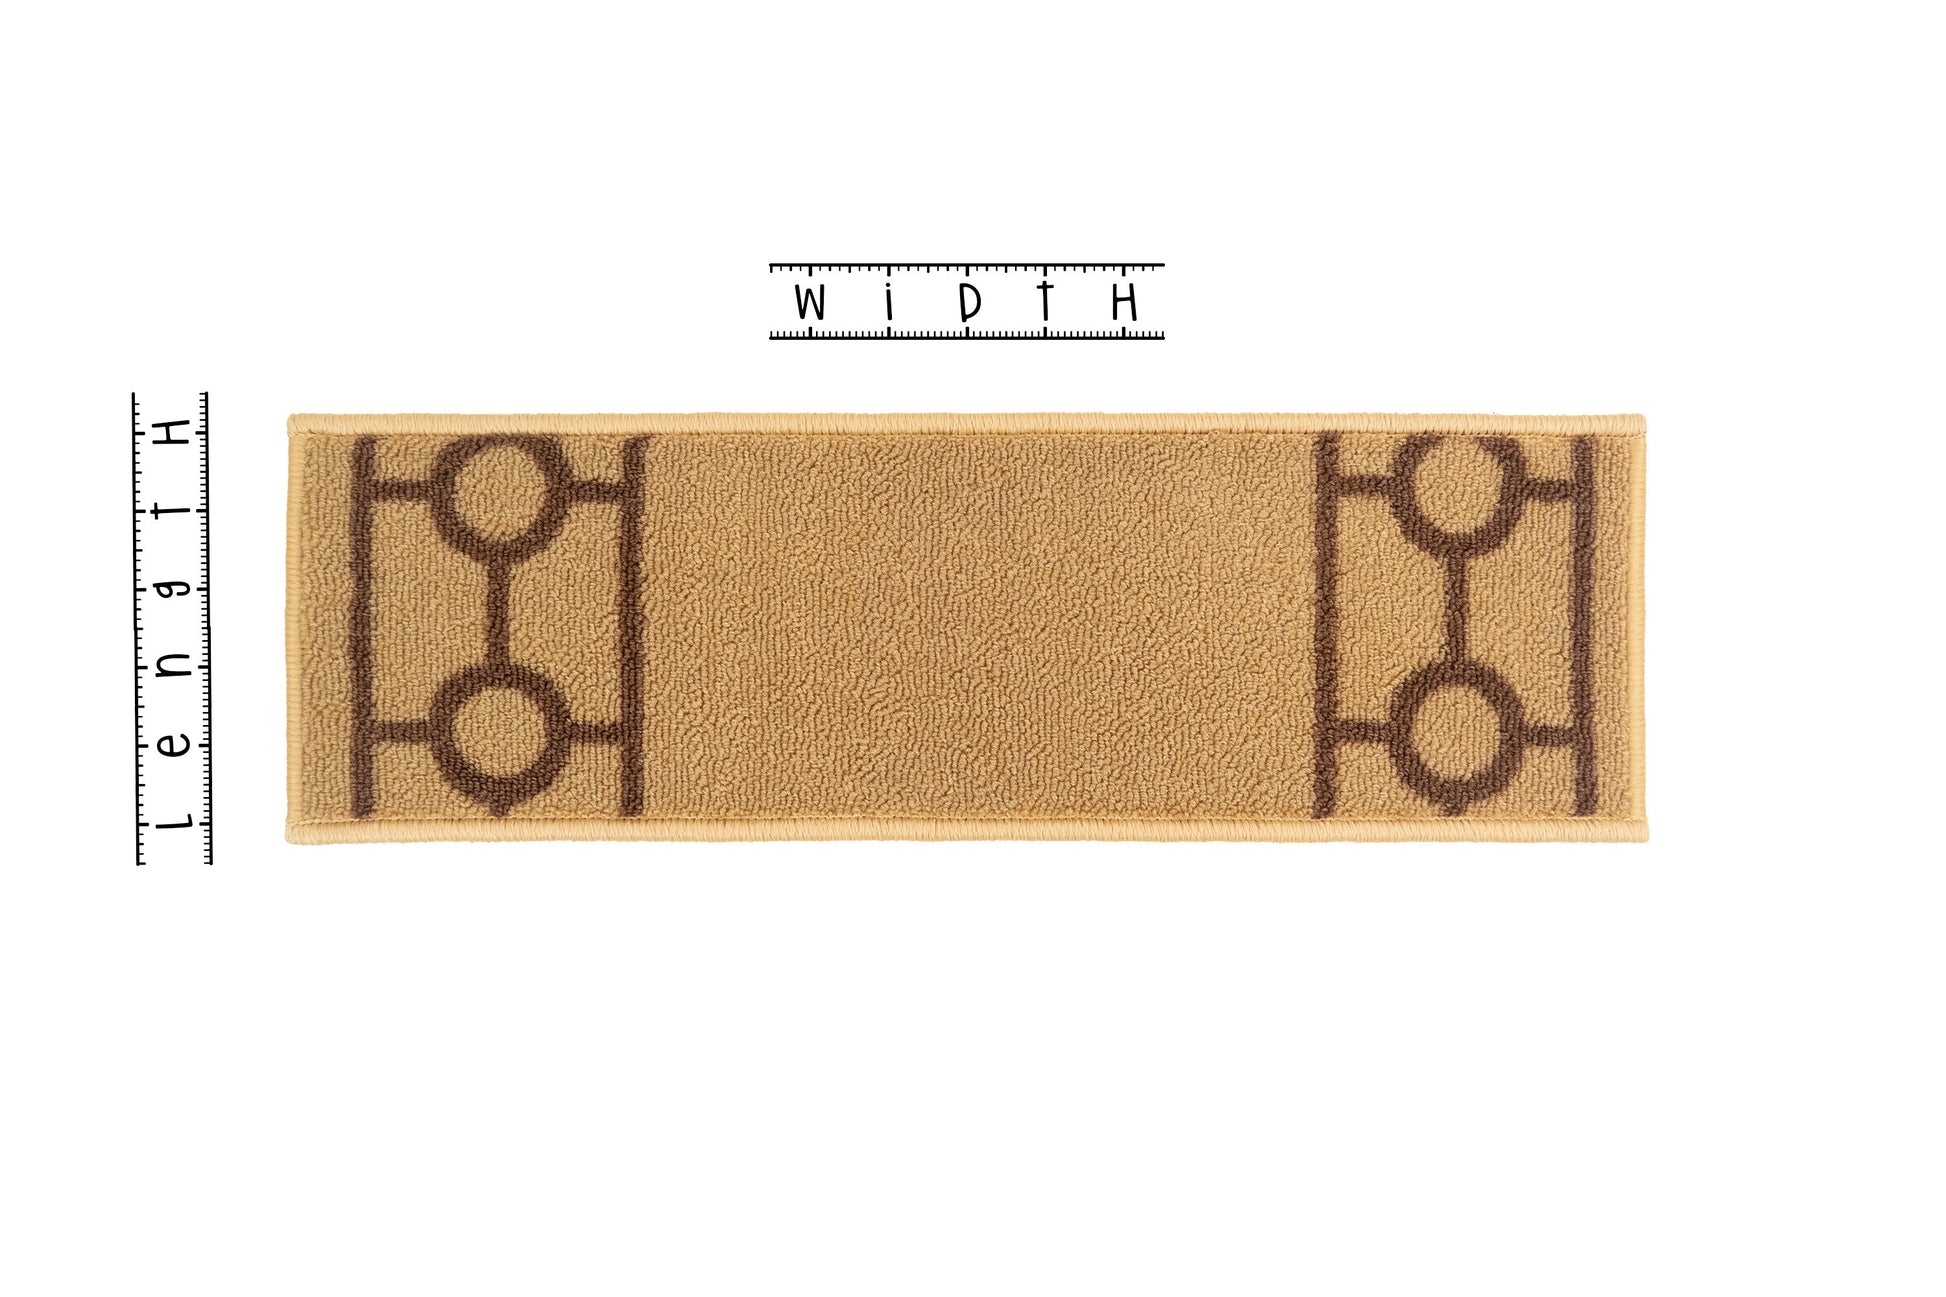 Solid Border Design Cut to Size Beige Color 36 Width x Your Choice Length Custom Size Slip Resistant Stair Runner Rug